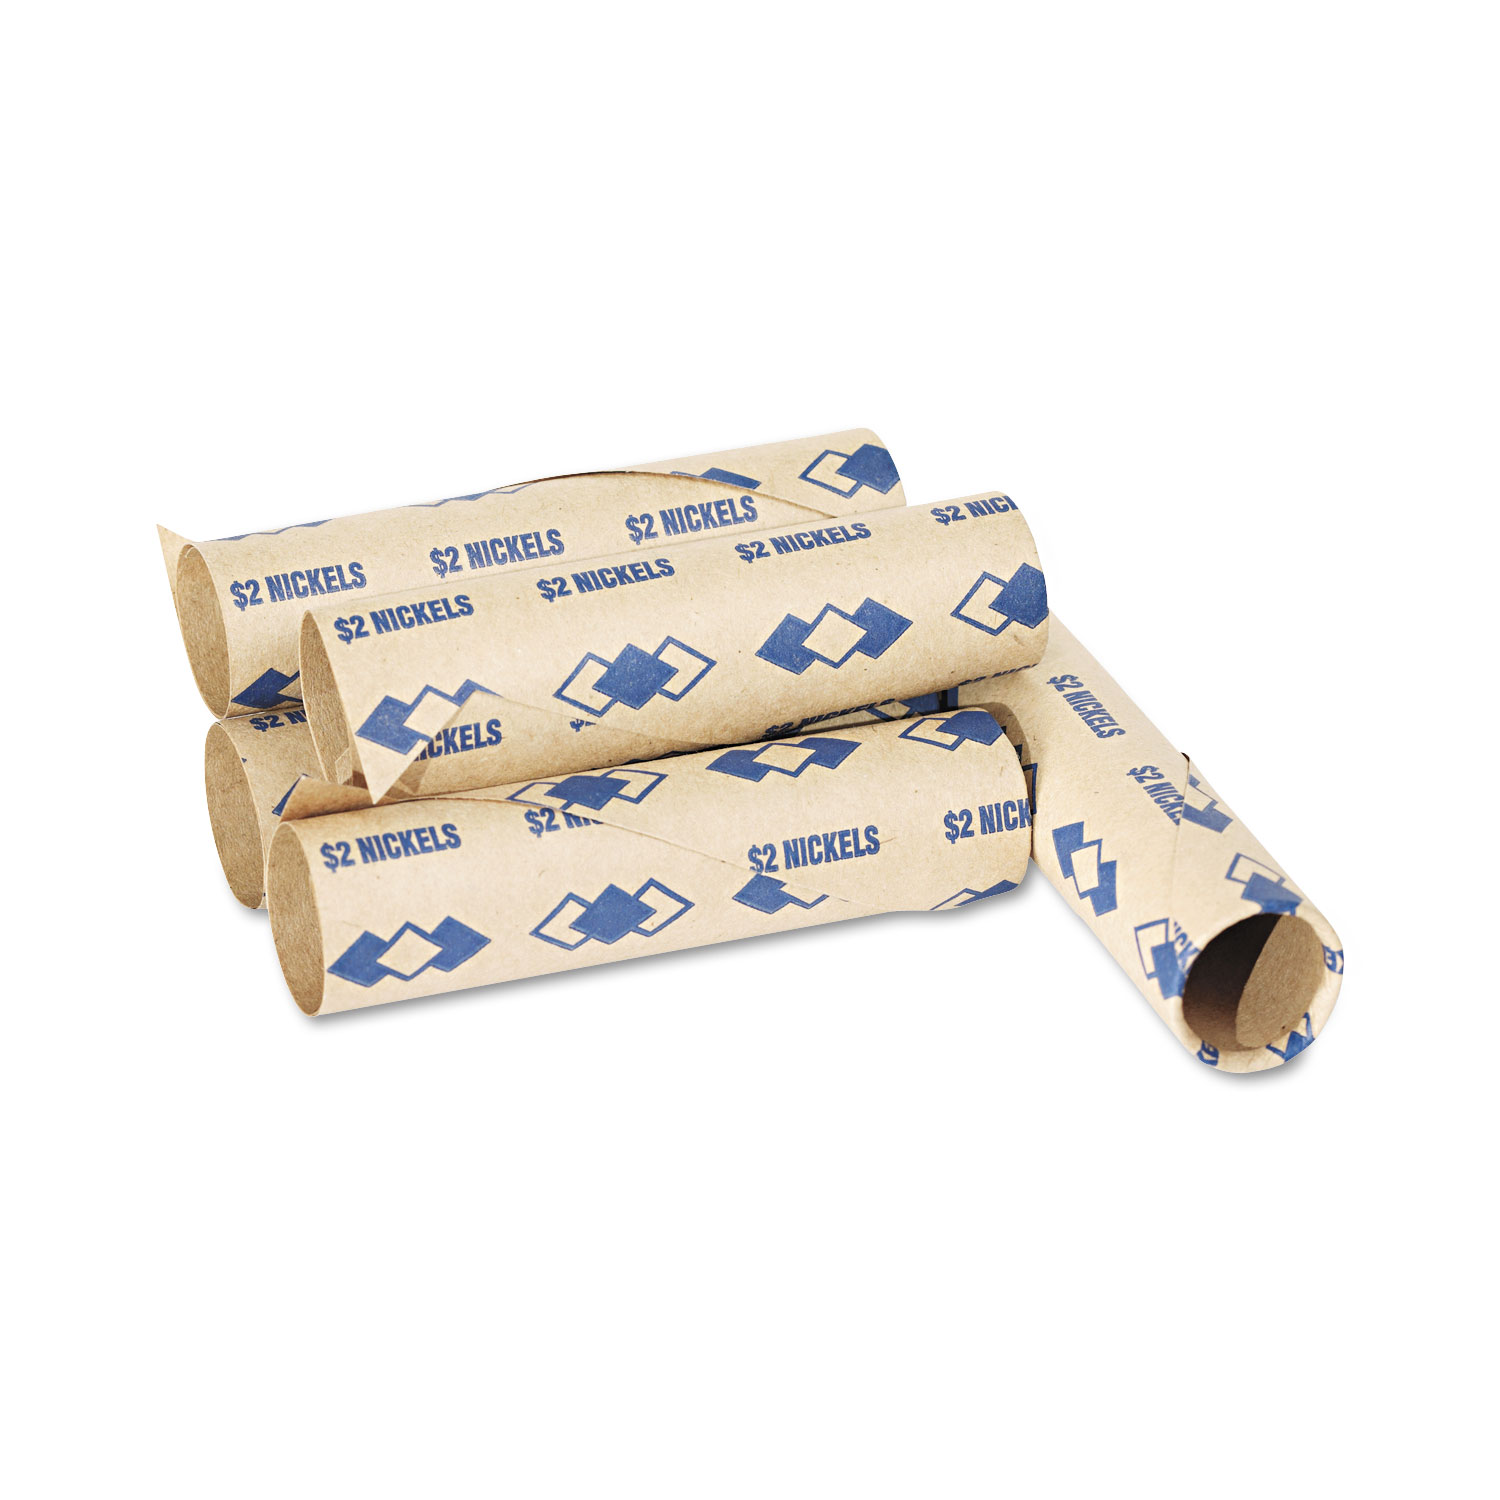  Iconex 65070 Preformed Tubular Coin Wrappers, Nickels, $2, 1000 Wrappers/Carton (PMC65070) 